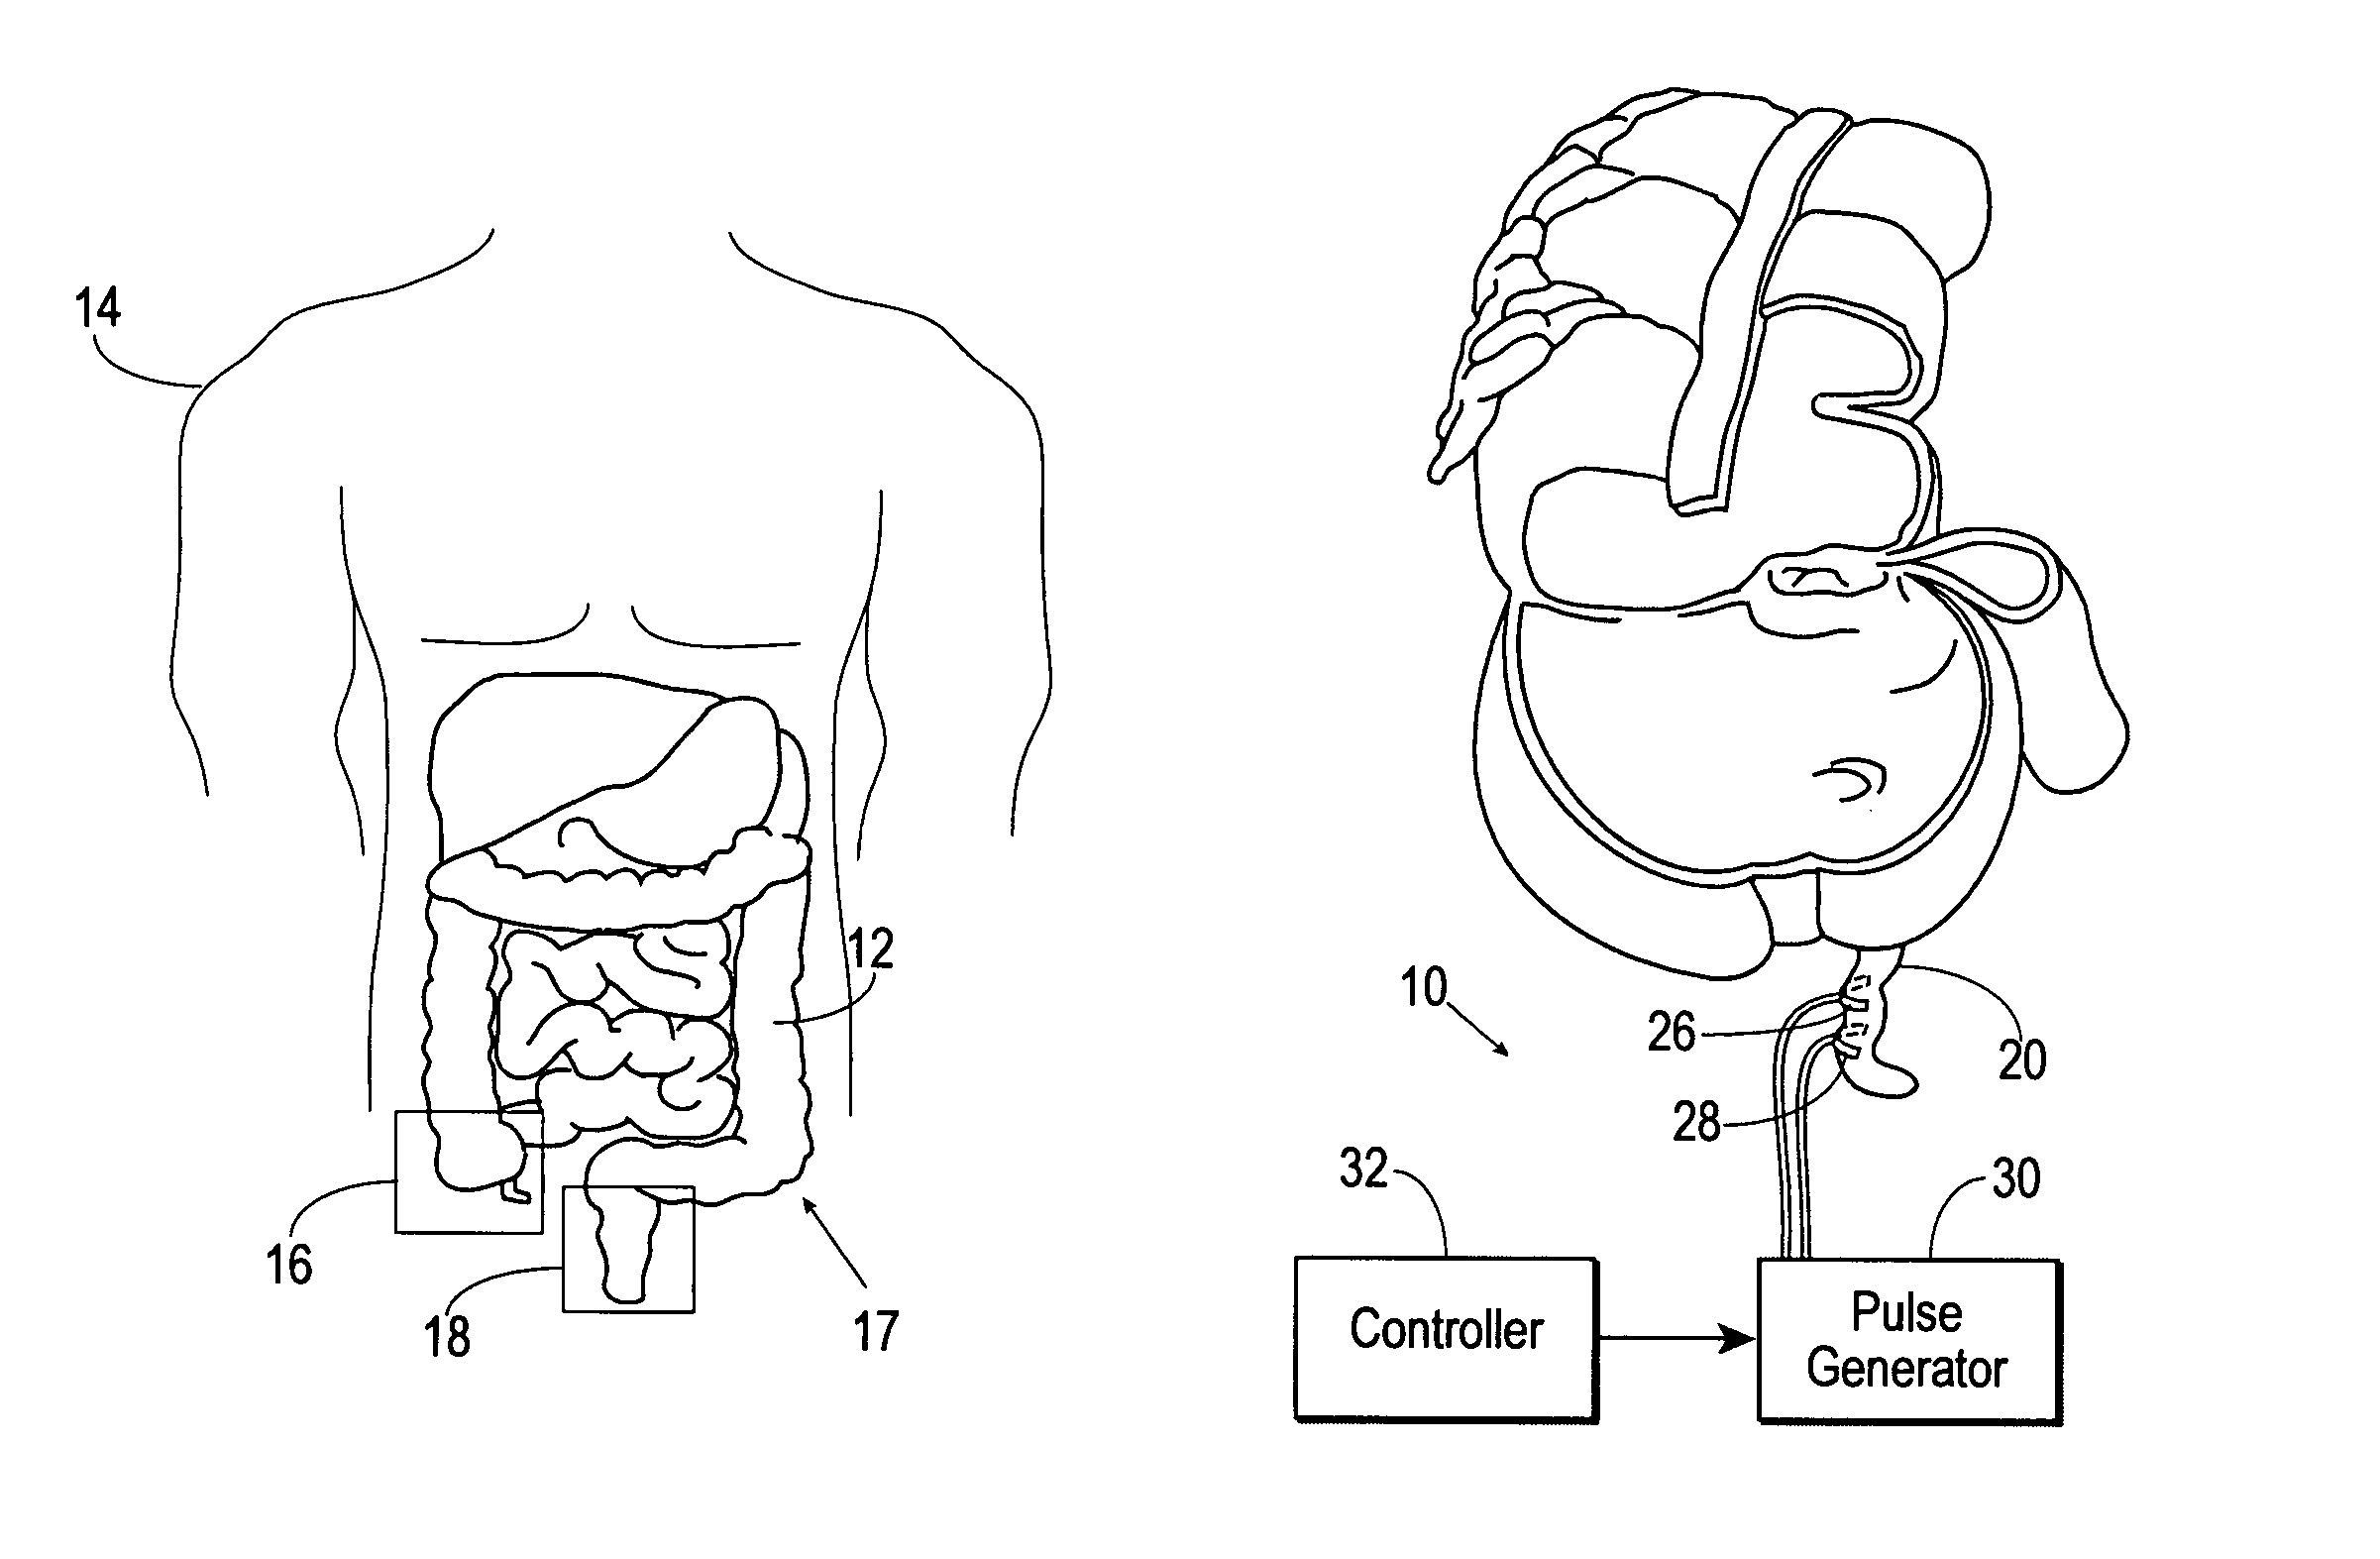 Appendicular and rectal stimulator device for digestive and eating disorders